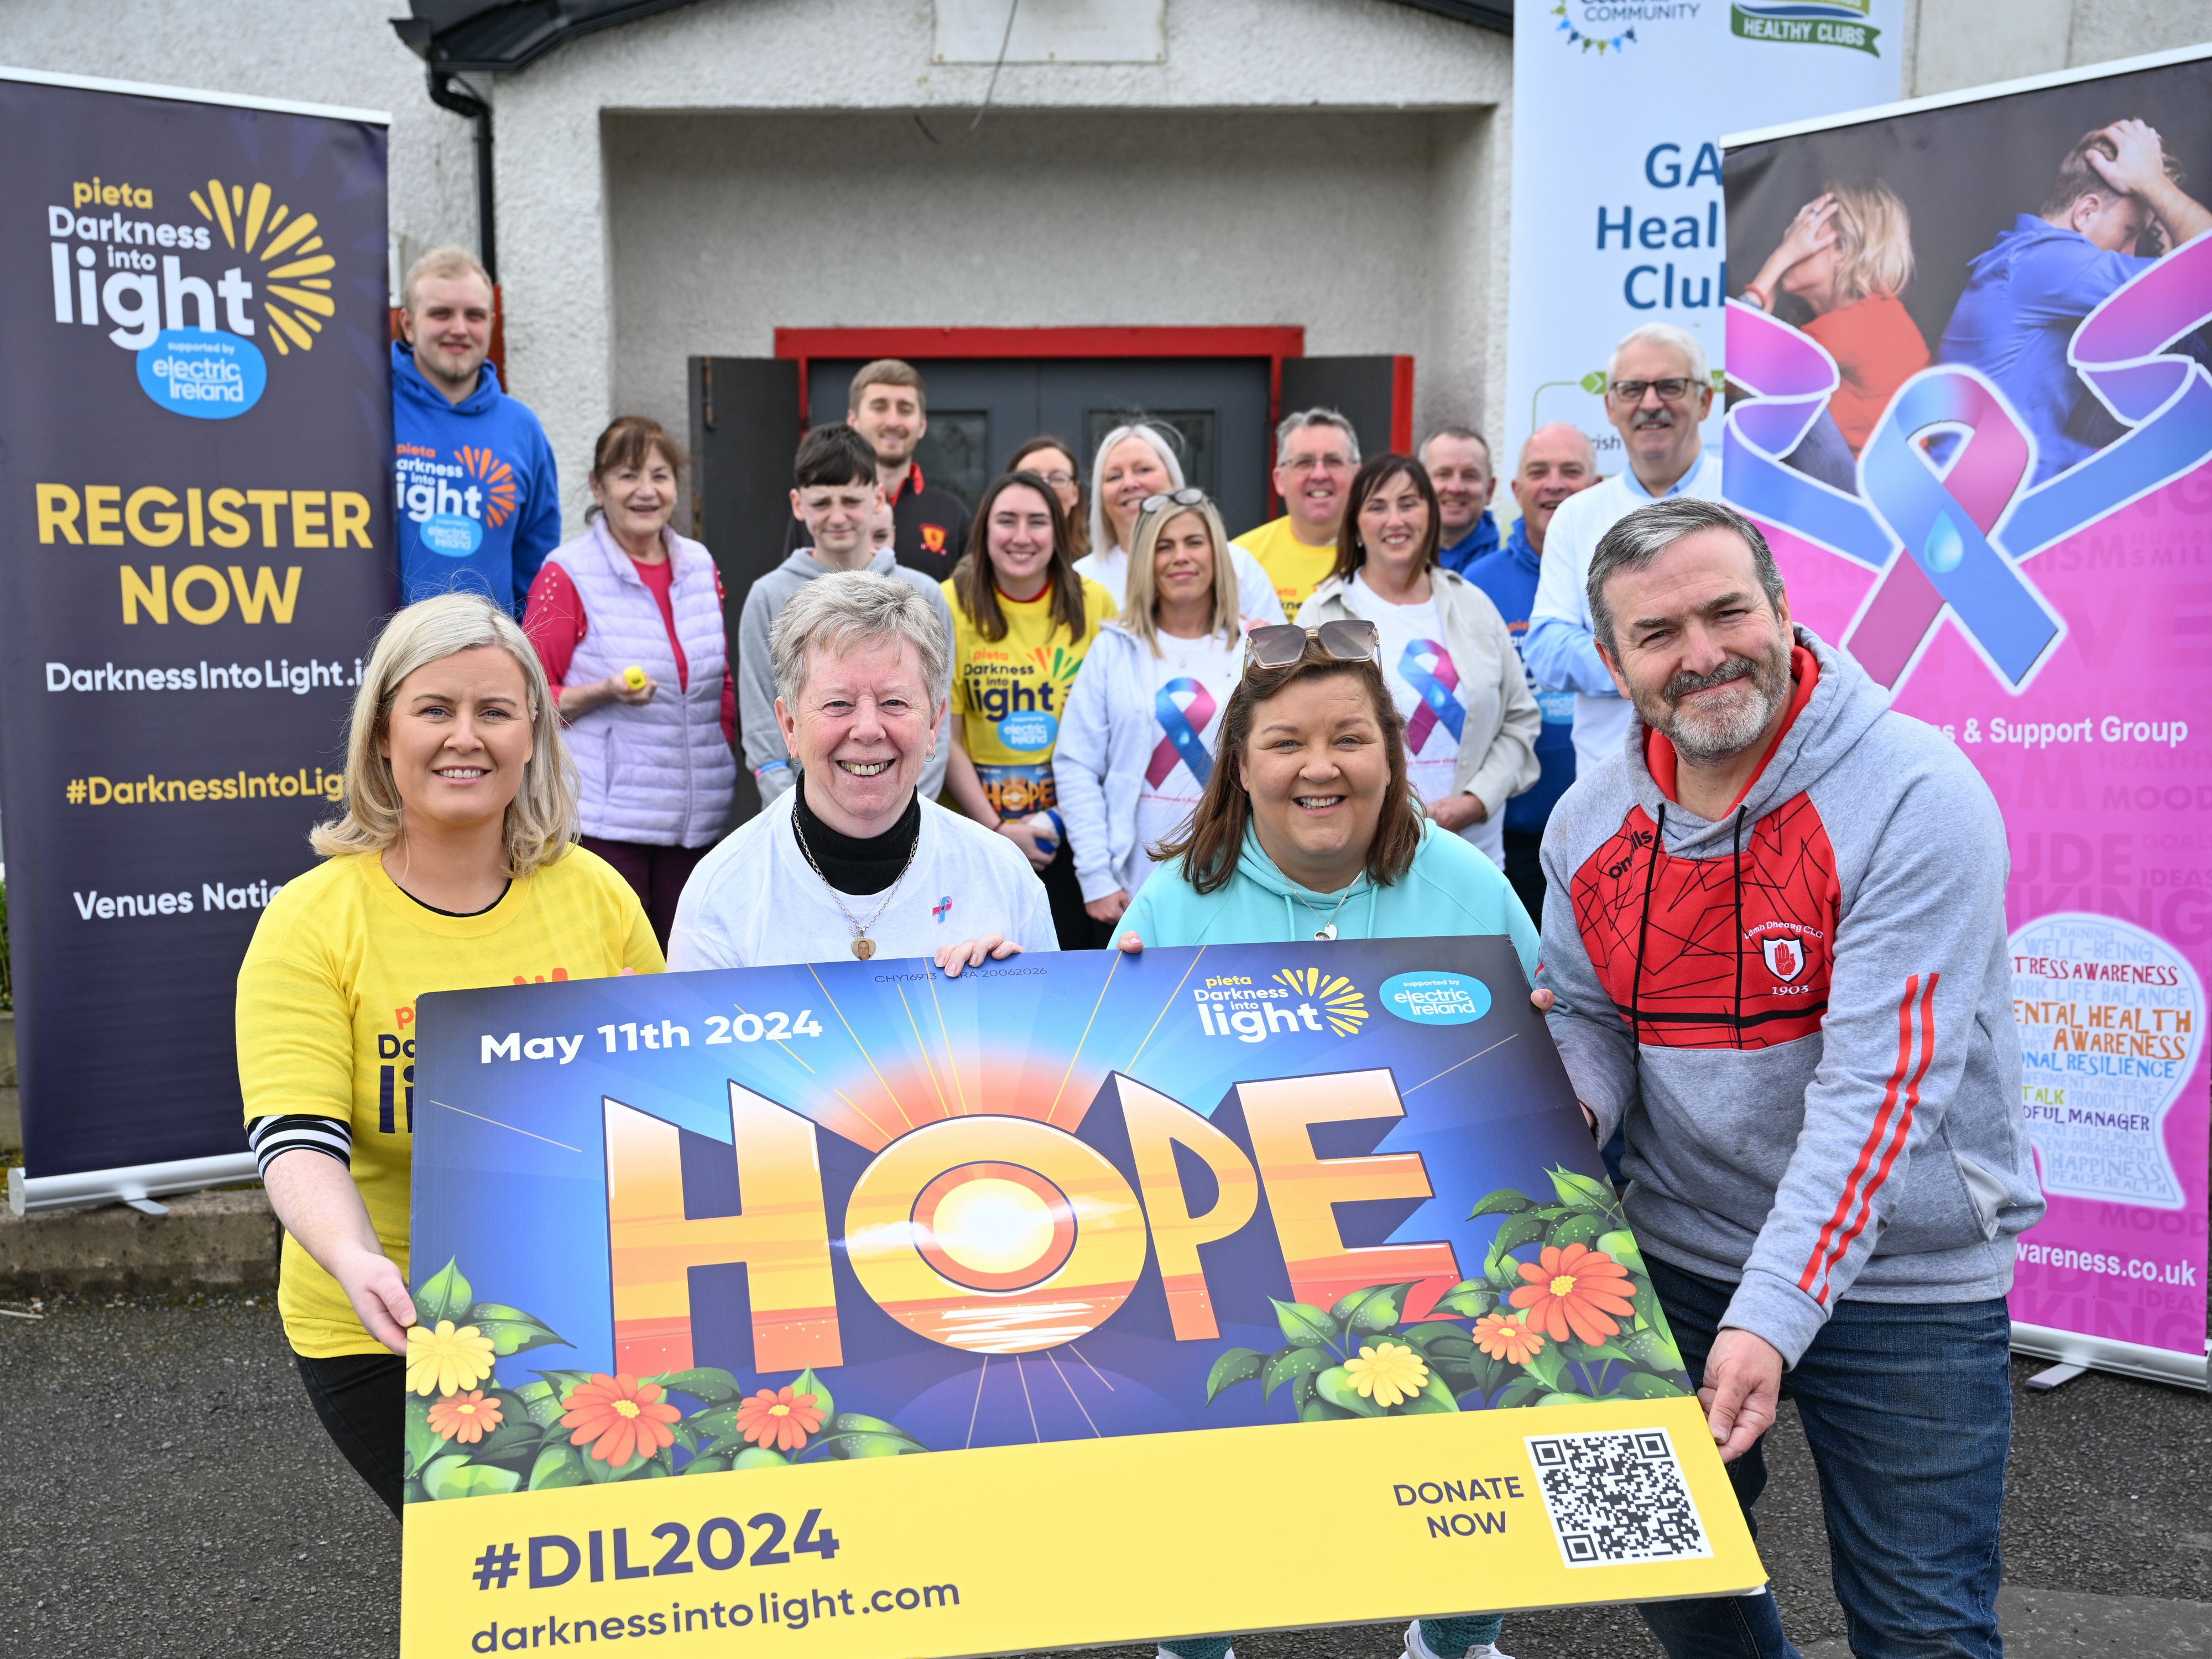 GREAT CAUSE: Emma Murphy ( Pieta), Esther Meighan (Suicide Awareness Support Group), Margaret Walker (Suicide Awareness Support Group) and Michale Boyle (Lámh Dhearg)